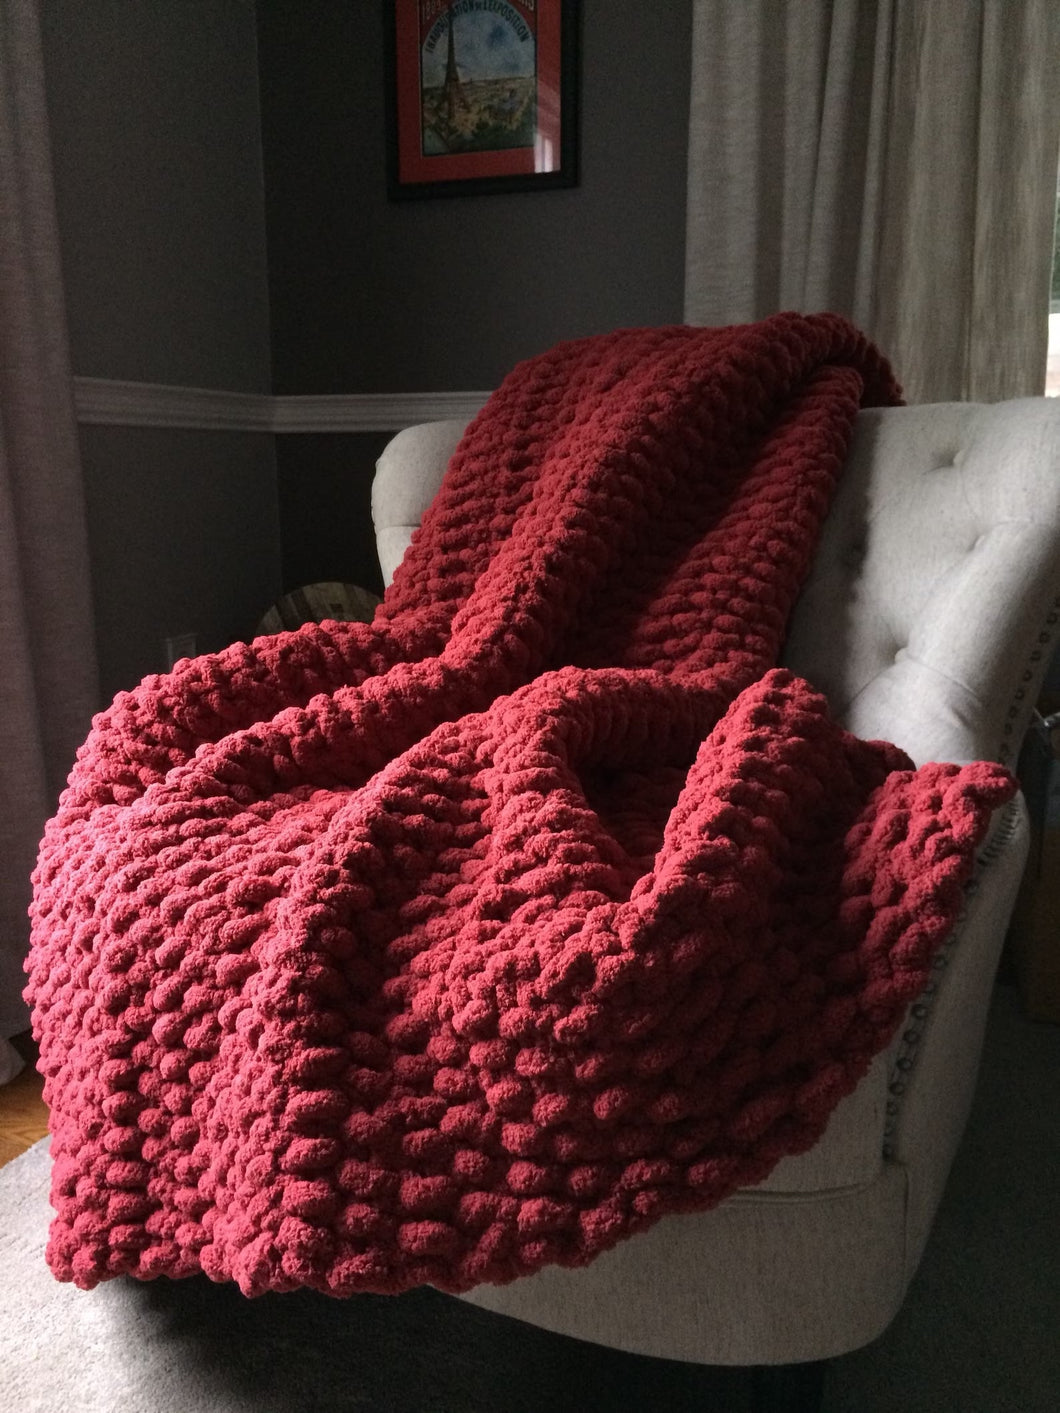 Chunky Knit Blanket | Cranberry Throw Blanket - Hands On For Homemade